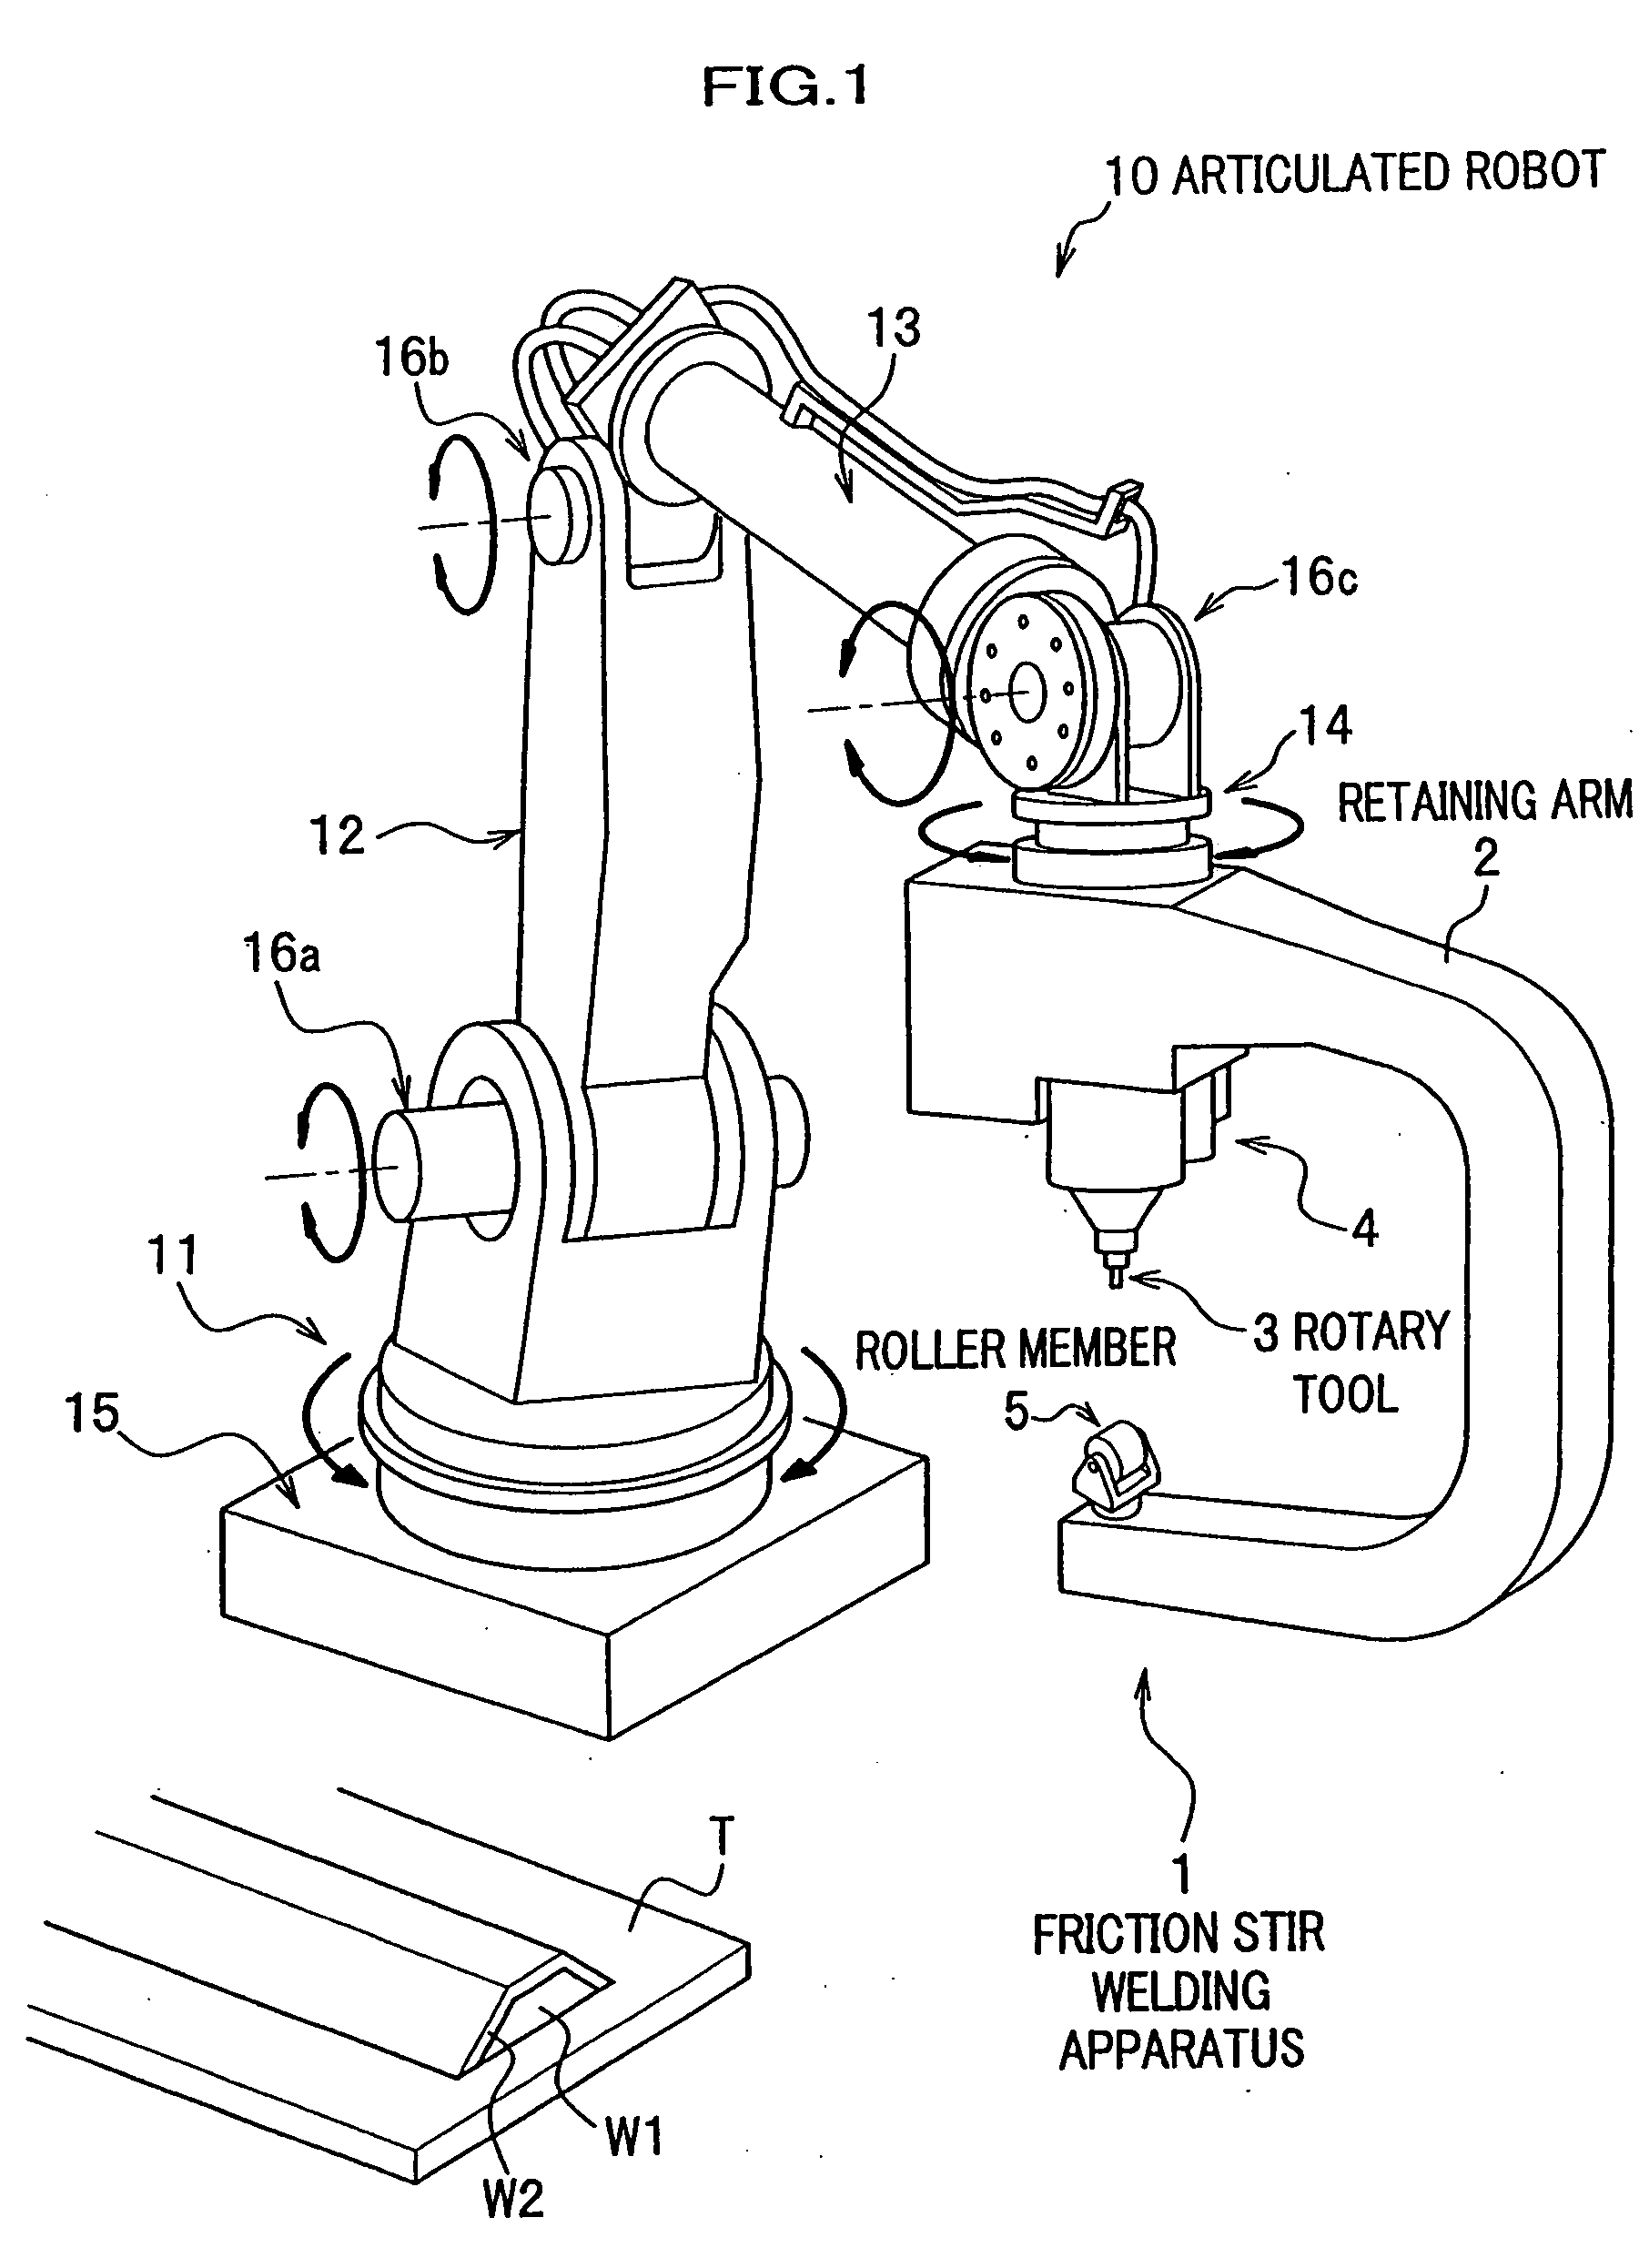 Friction stir welding apparatus and method of operating same